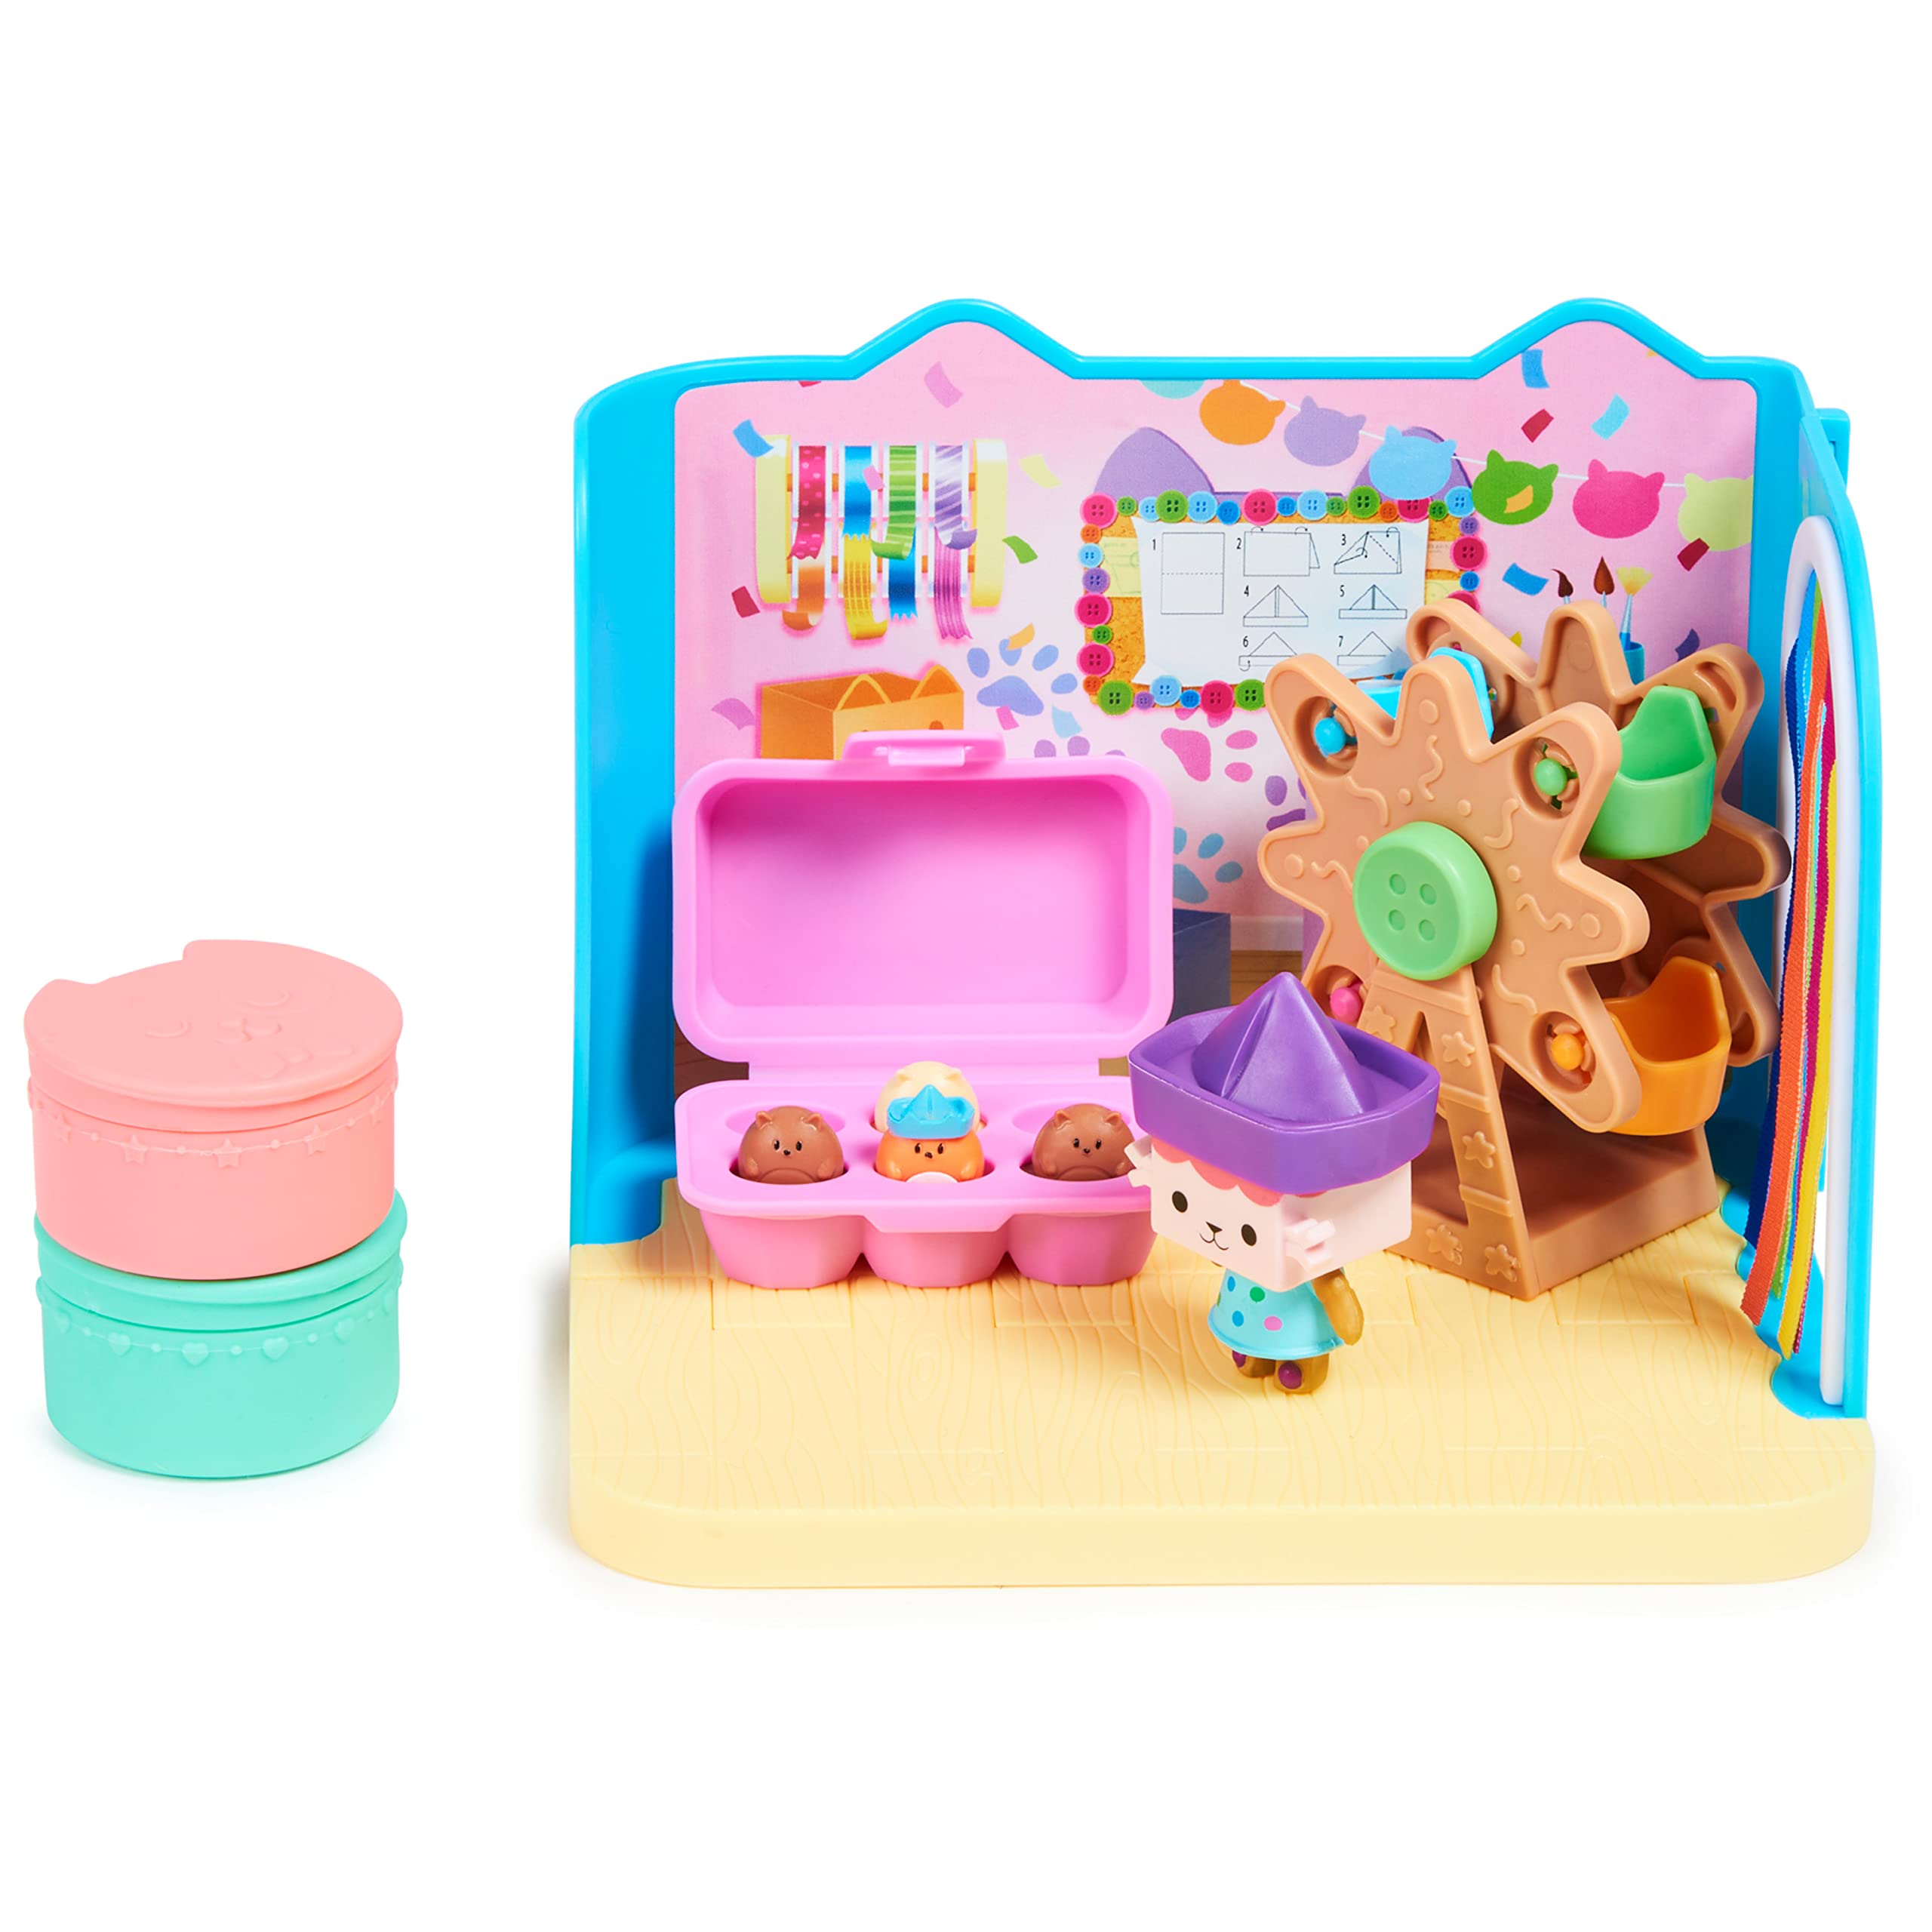 $5.00: Gabby's Dollhouse, Baby Box Cat Craft-A-Riffic Room with Exclusive Figure